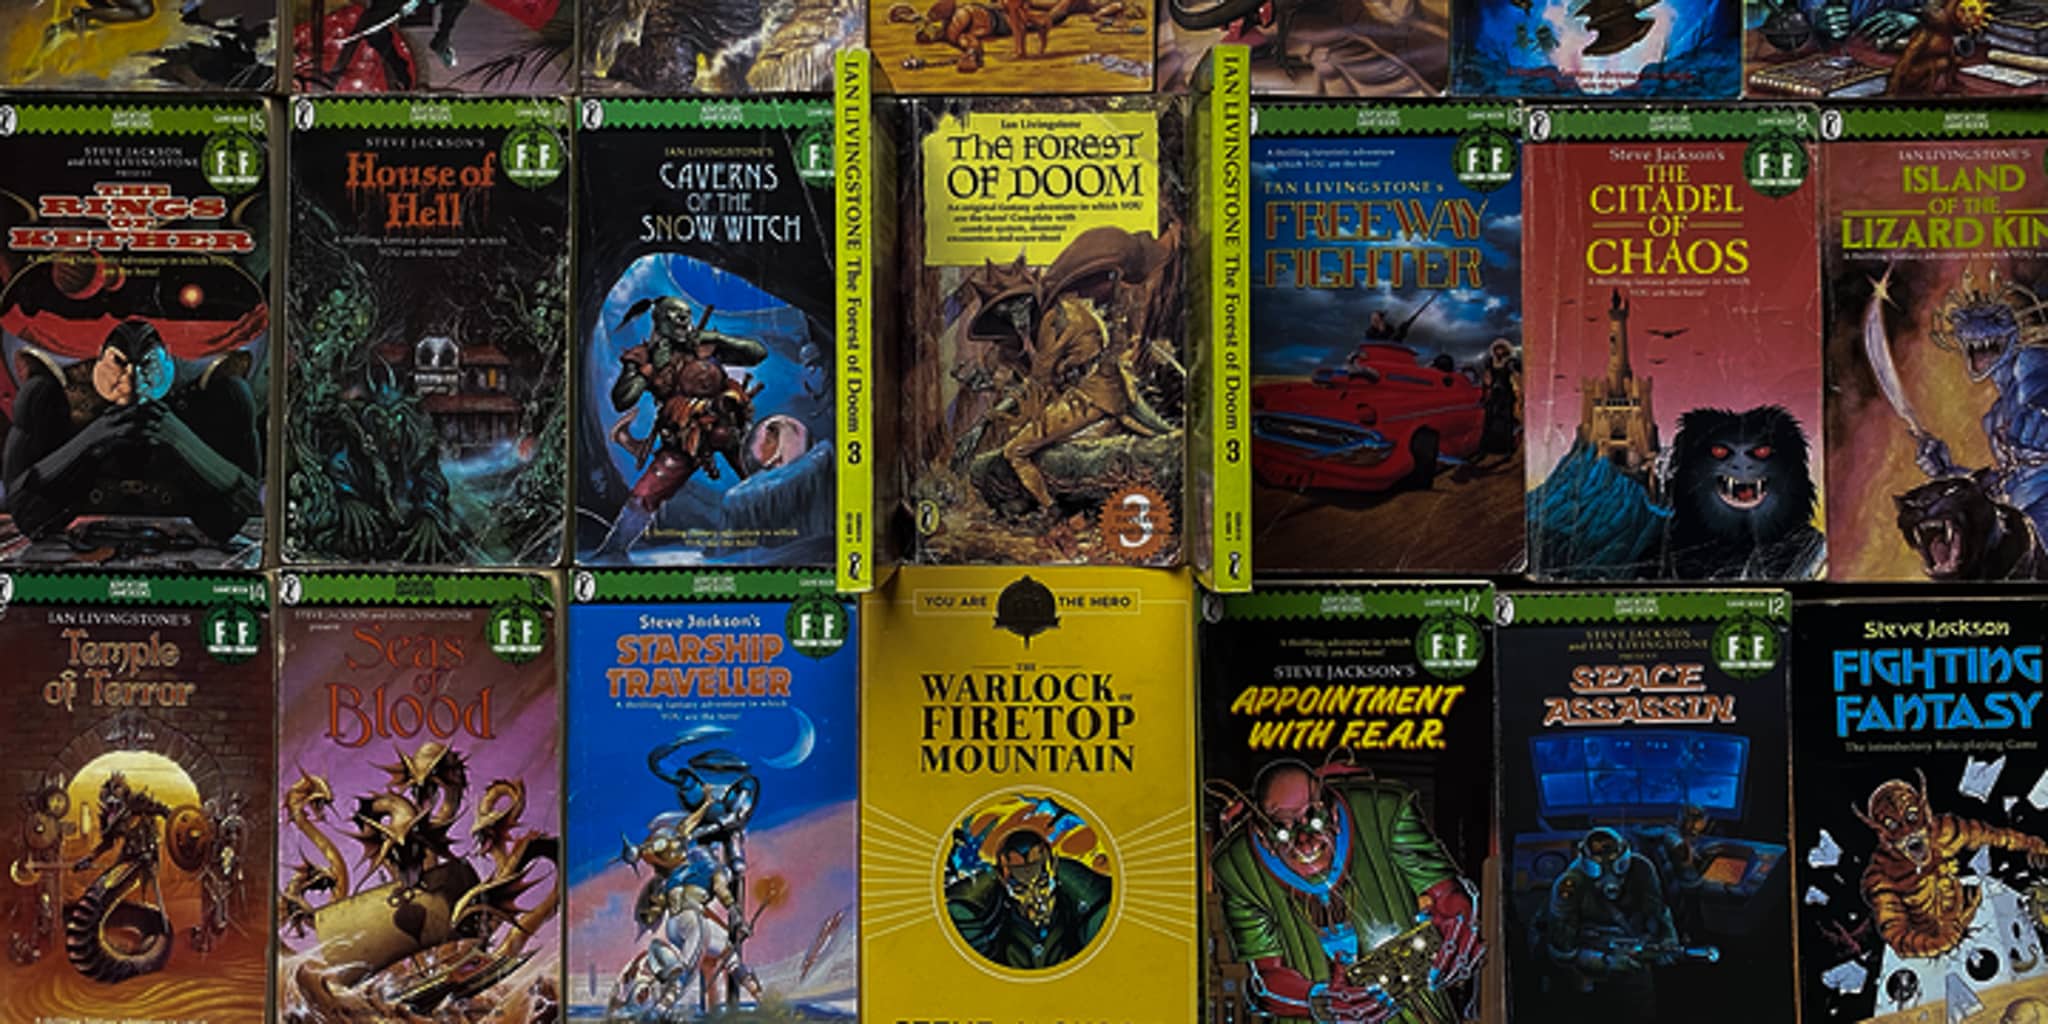 Why interactive content creators should take inspiration from classic Choose Your Own Adventure gamebooks